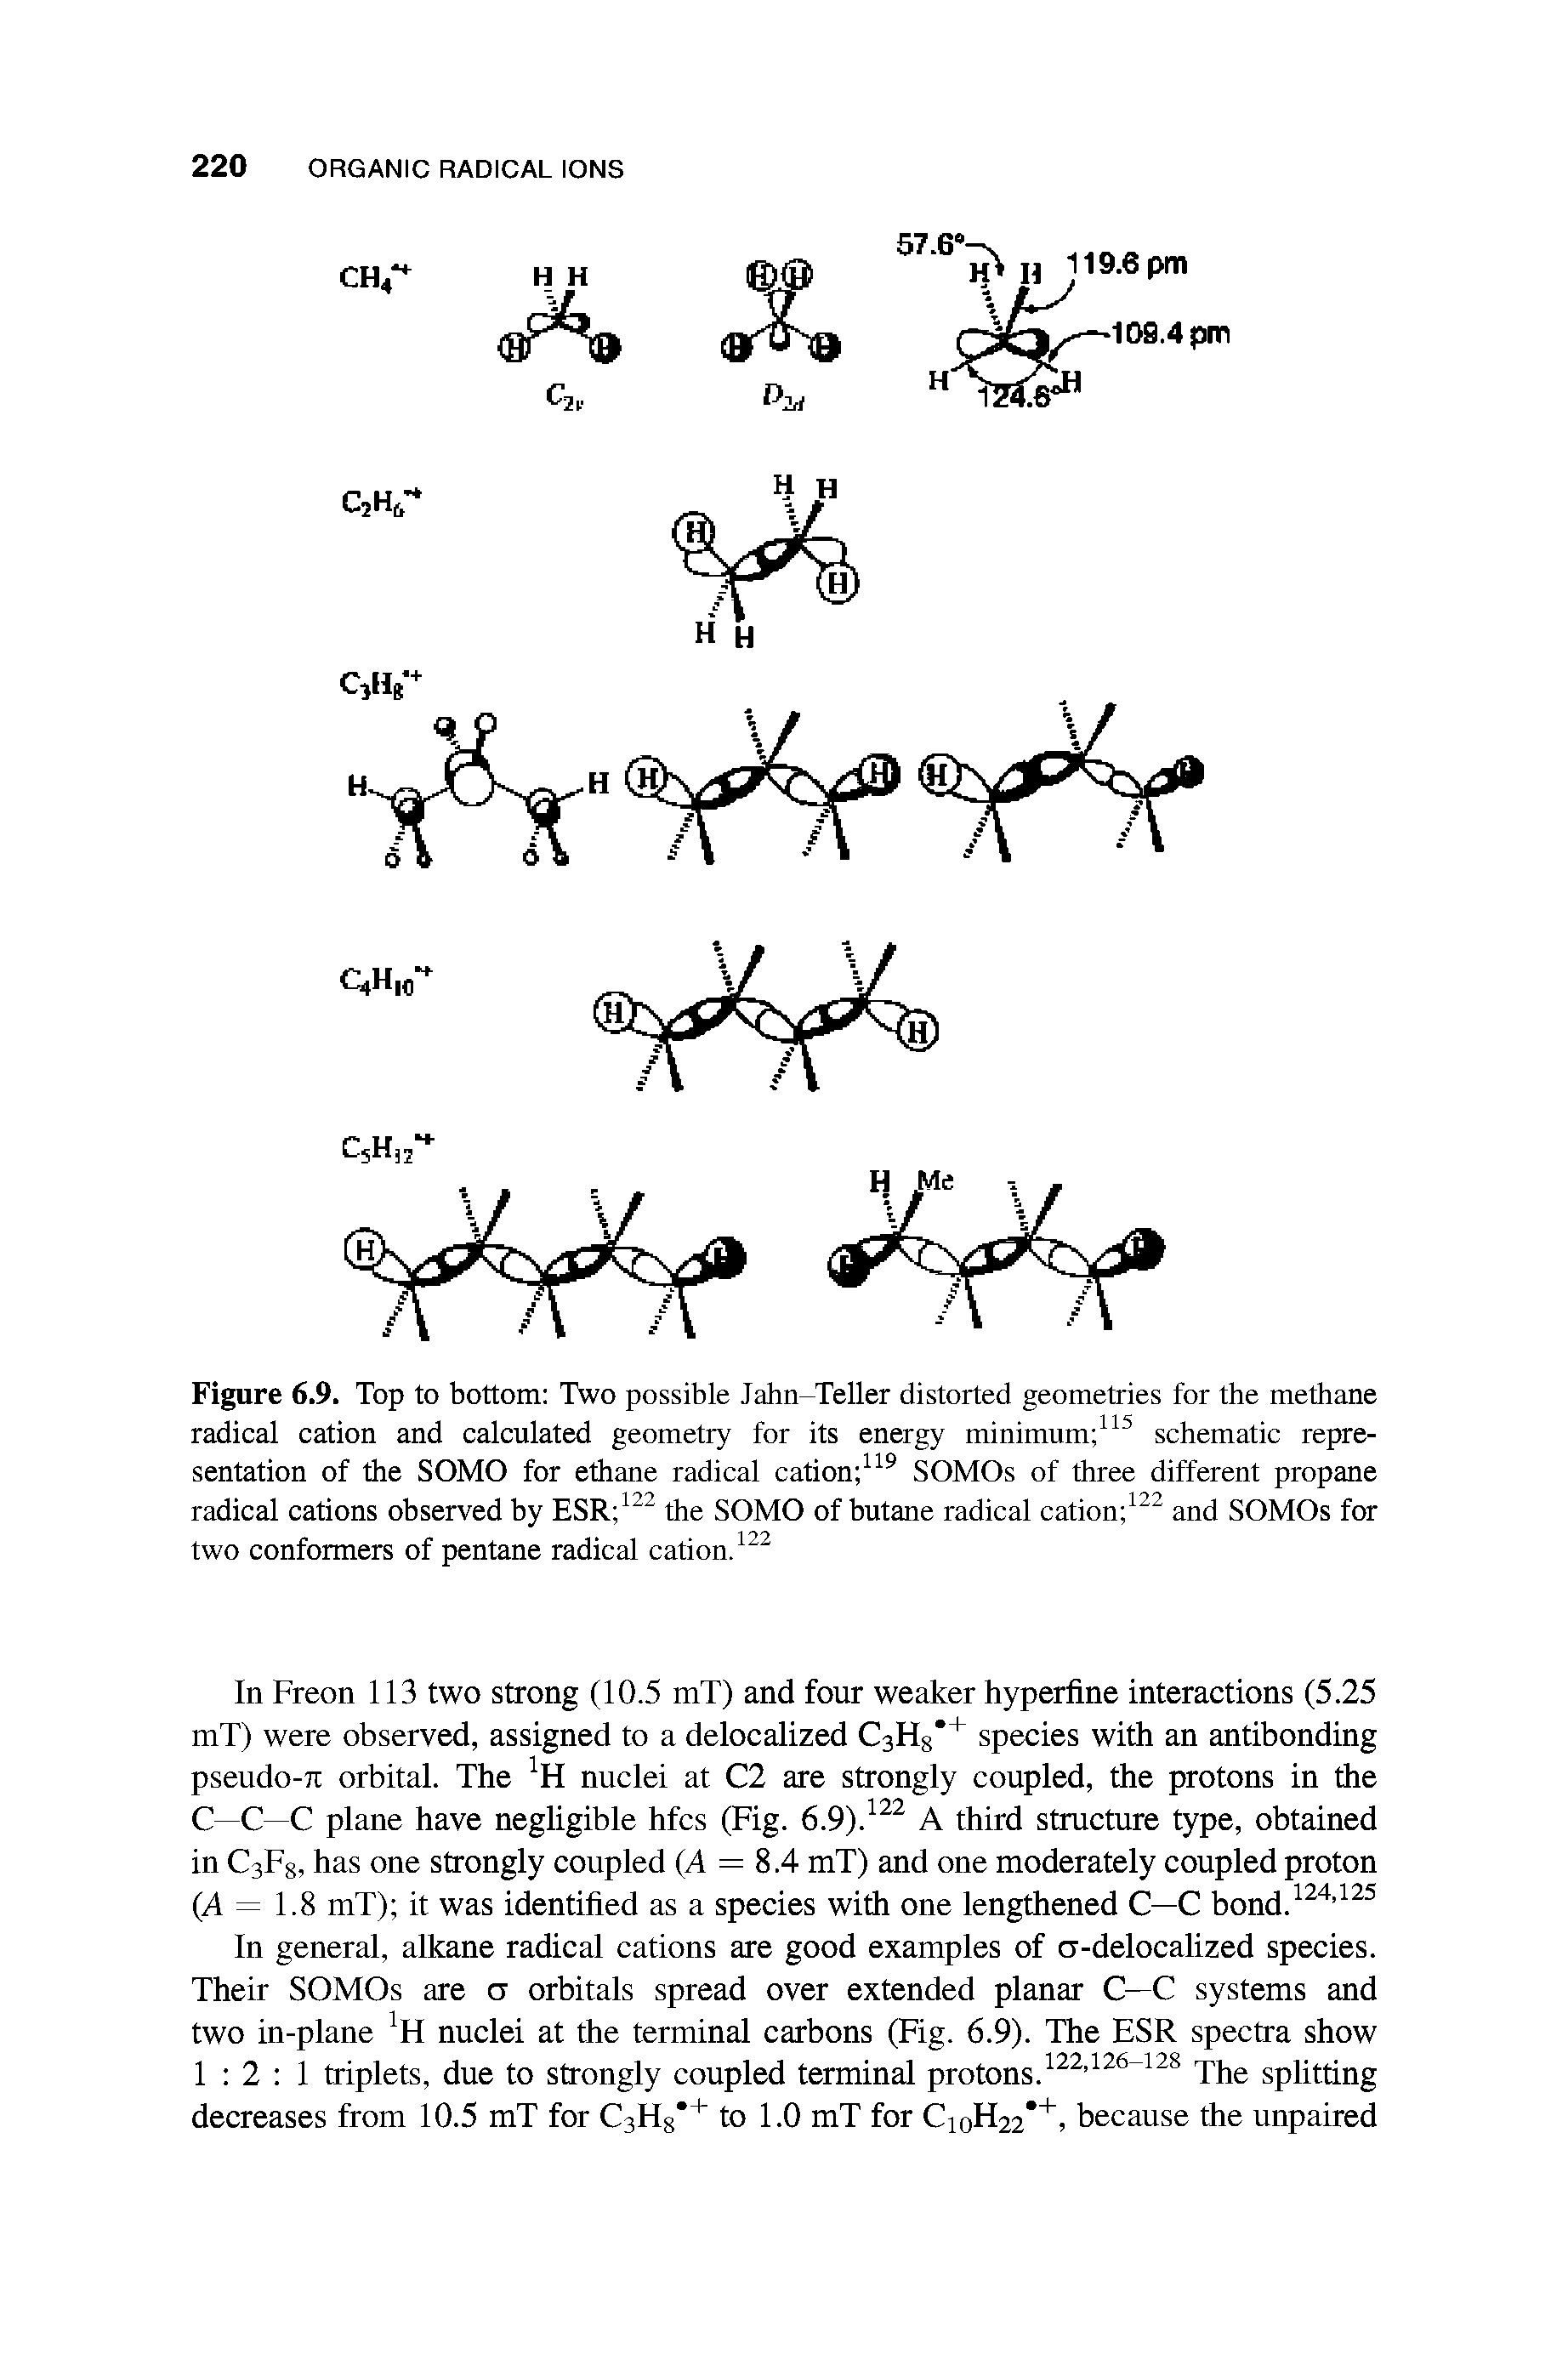 Figure 6.9. Top to bottom Two possible Jahn-Teller distorted geometries for the methane radical cation and calculated geometry for its energy minimum schematic representation of the SOMO for ethane radical cation SOMOs of three different propane radical cations observed by ESR the SOMO of butane radical cation and SOMOs for two conformers of pentane radical cation.